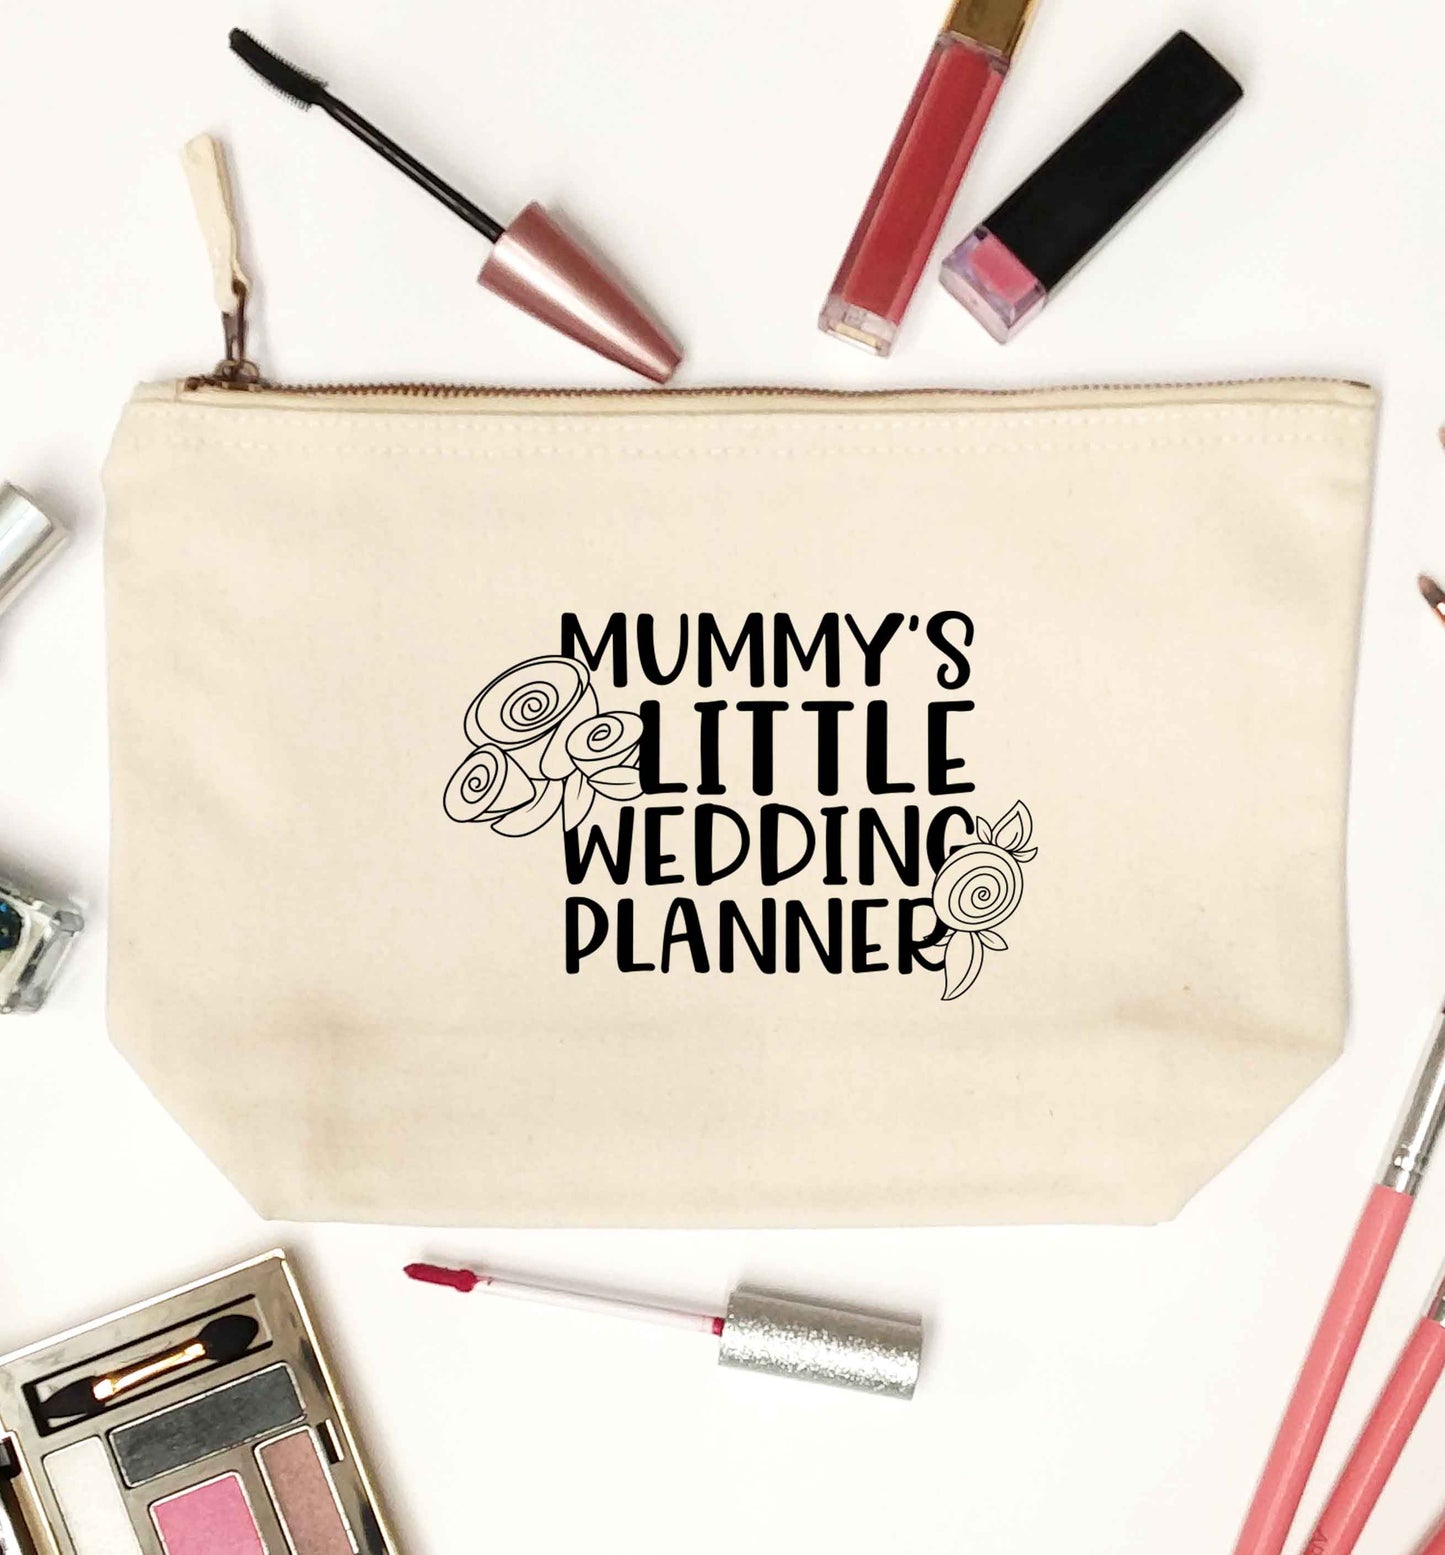 adorable wedding themed gifts for your mini wedding planner! natural makeup bag